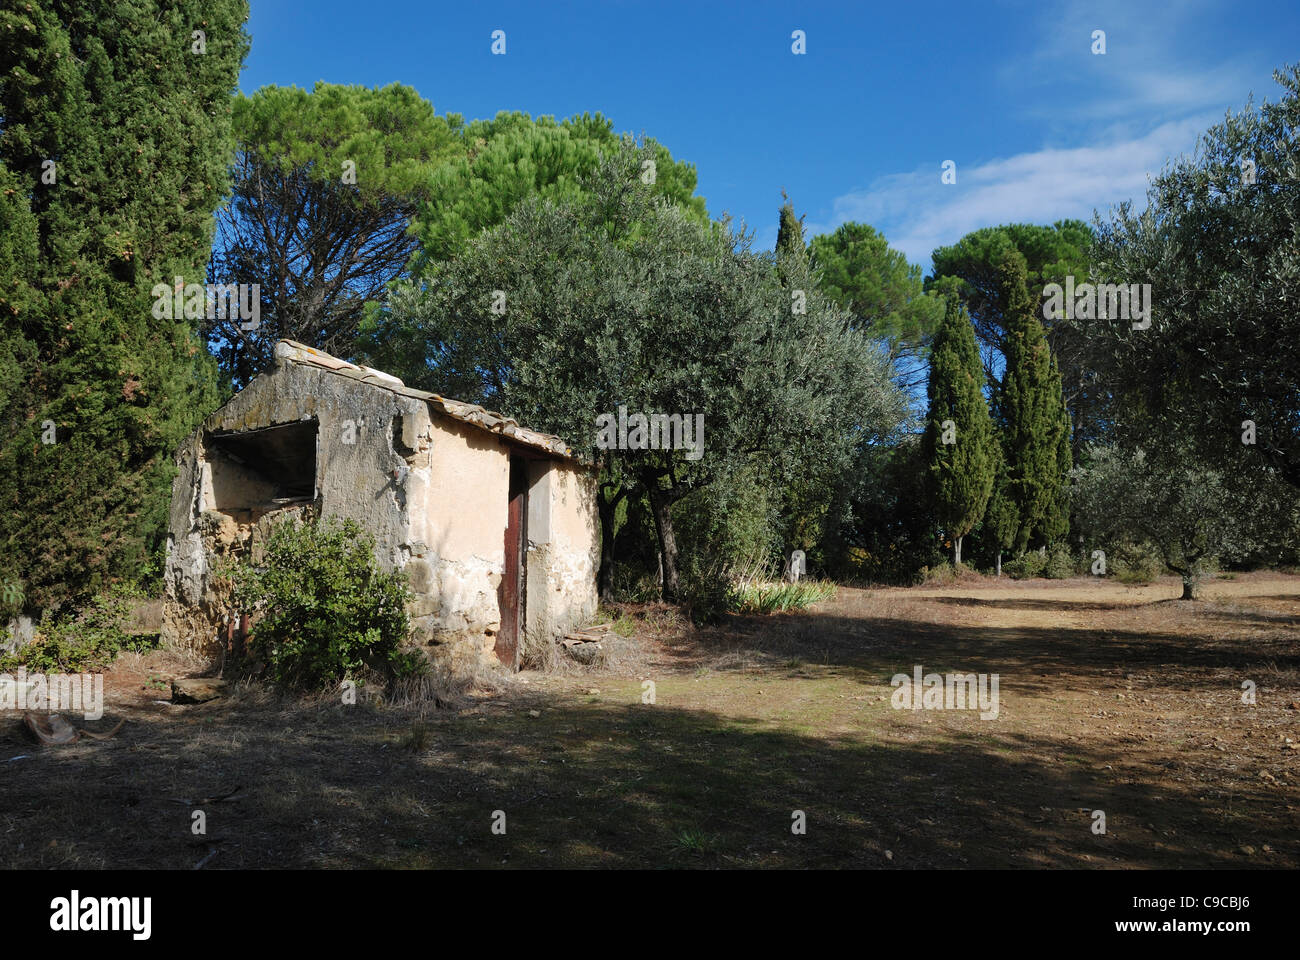 A derelict hut in the olive grove at Chateau de Lourmarin, Lourmarin, Provence, France. Stock Photo